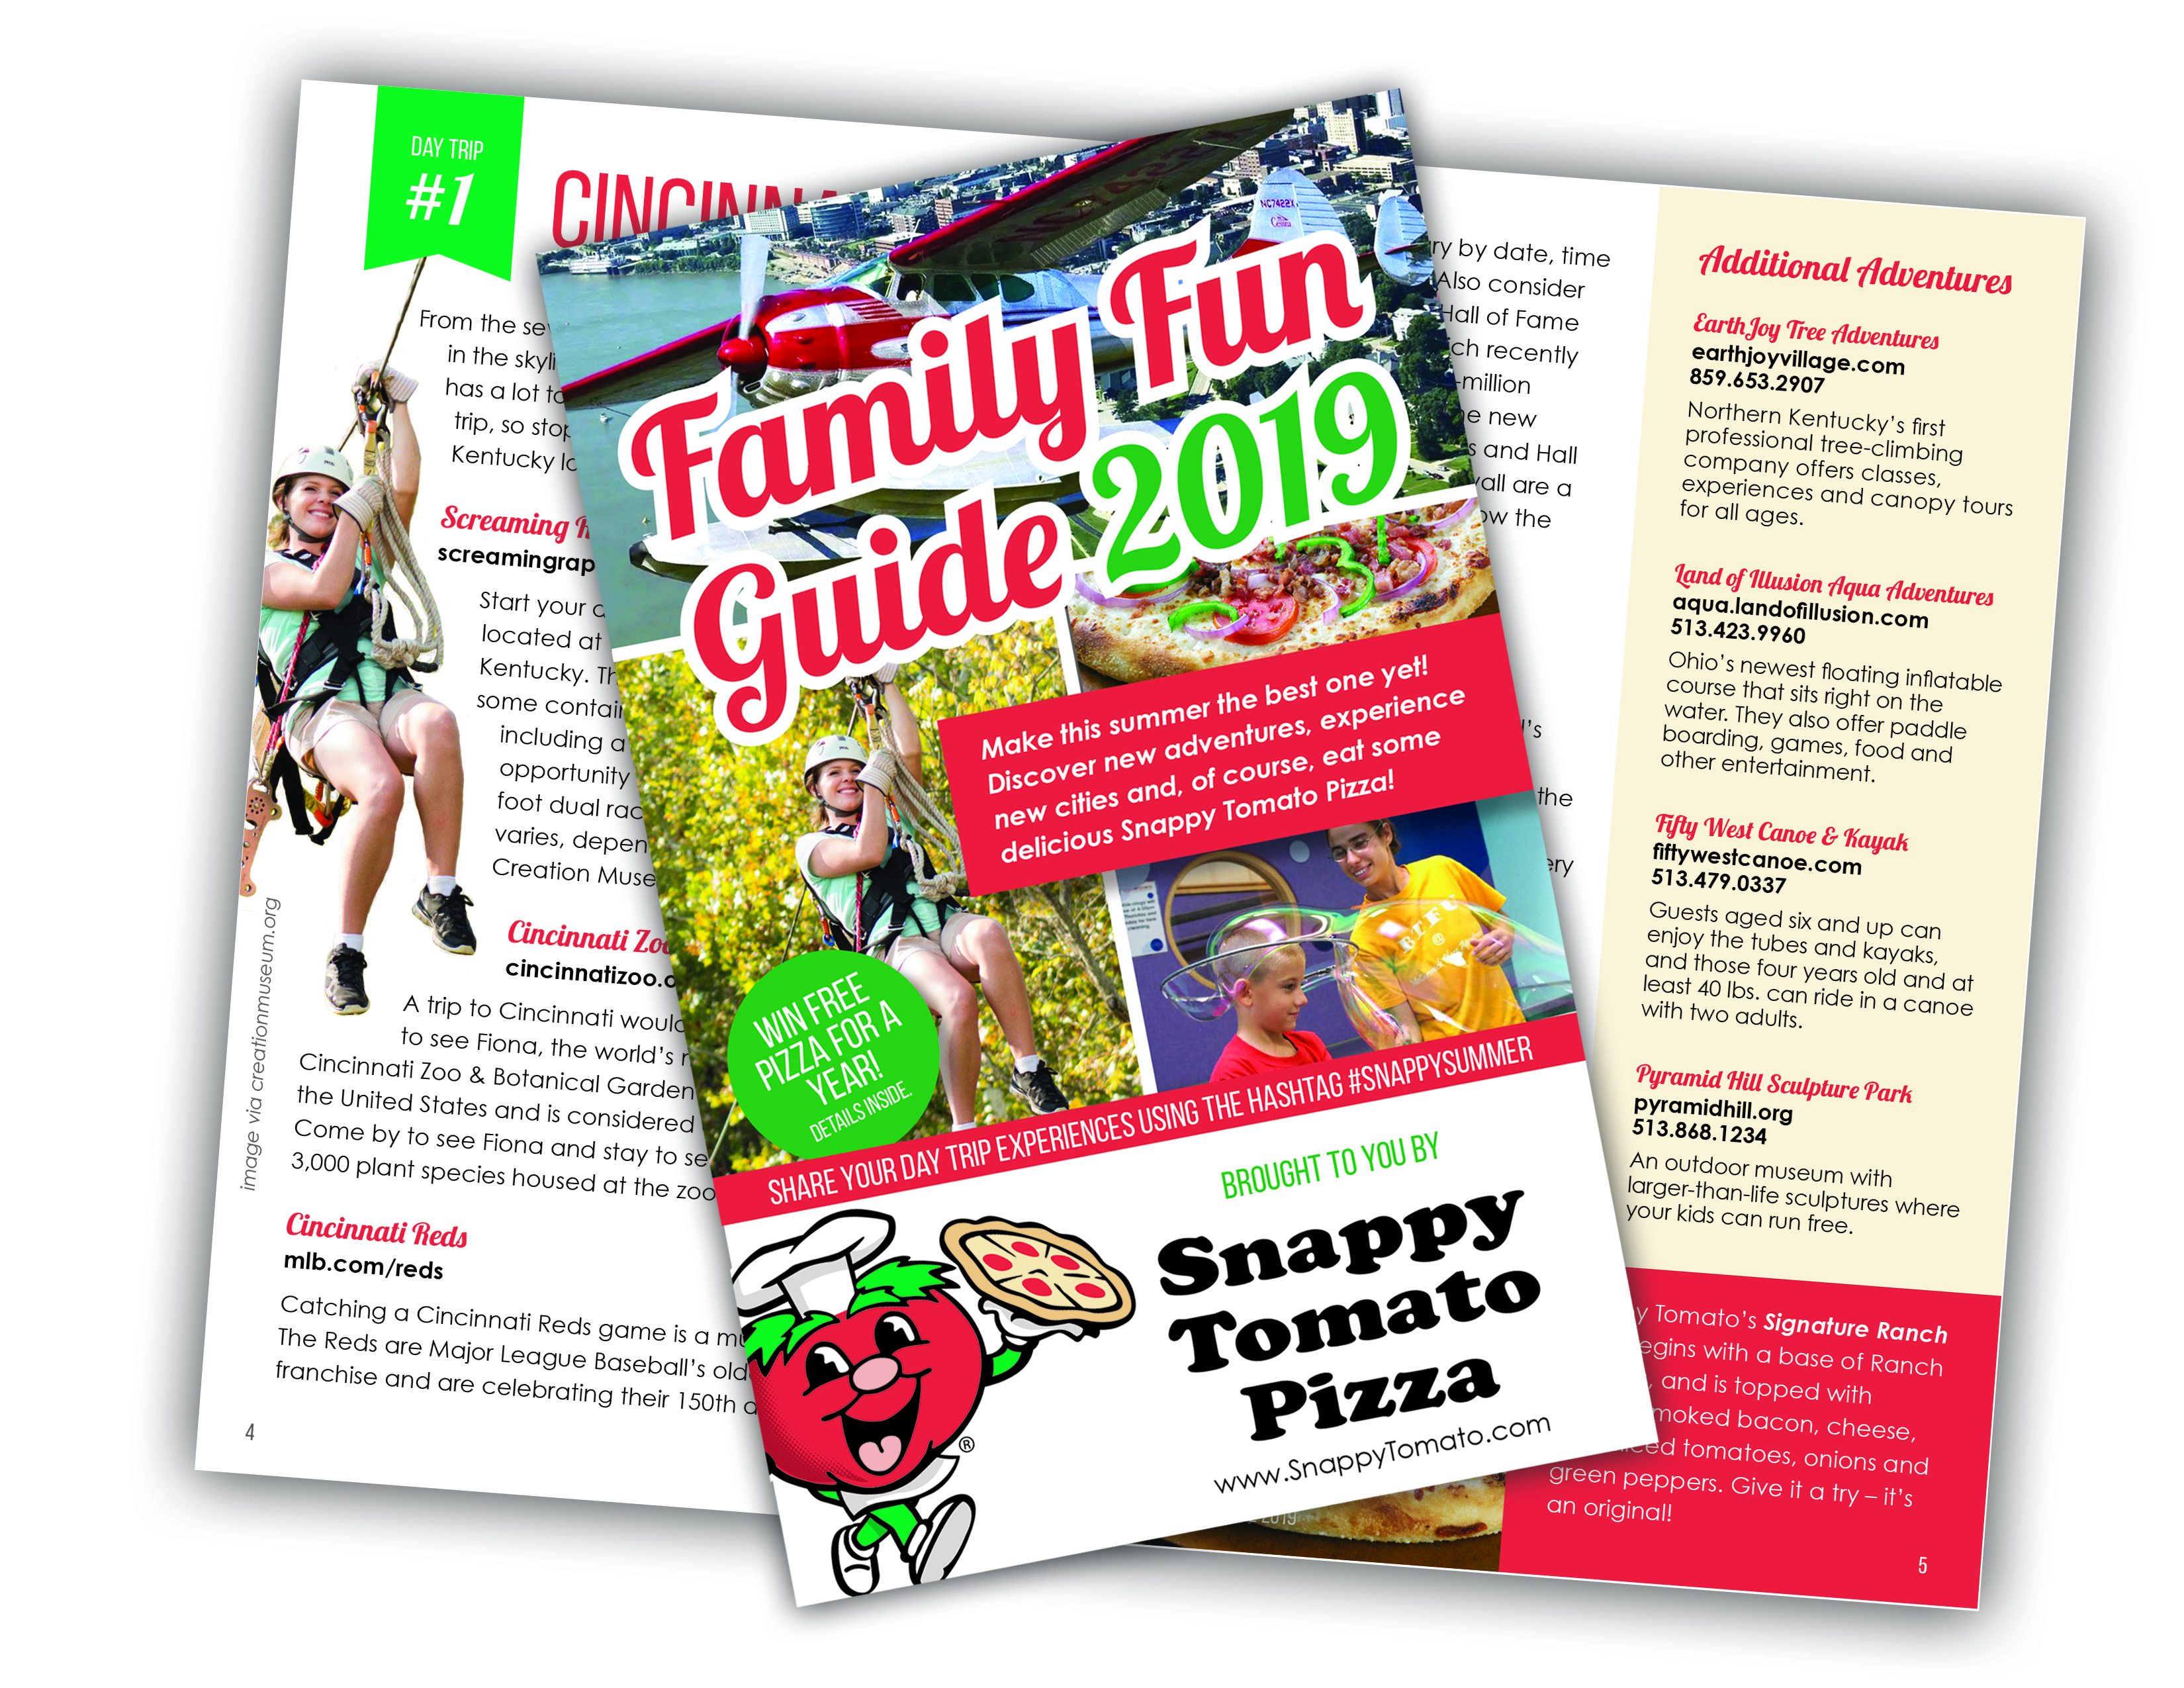 Snappy Tomato Pizza Family Fun Guide 2019 - A 16-page Family Focused Day Trip Travel Guide including Knoxville, Tennessee; Rabbit Hash, Kentucky; Cincinnati, Ohio; Columbus, Indiana; and Adams County, Ohio. #SnappySummer - www.SnappyTomato.com